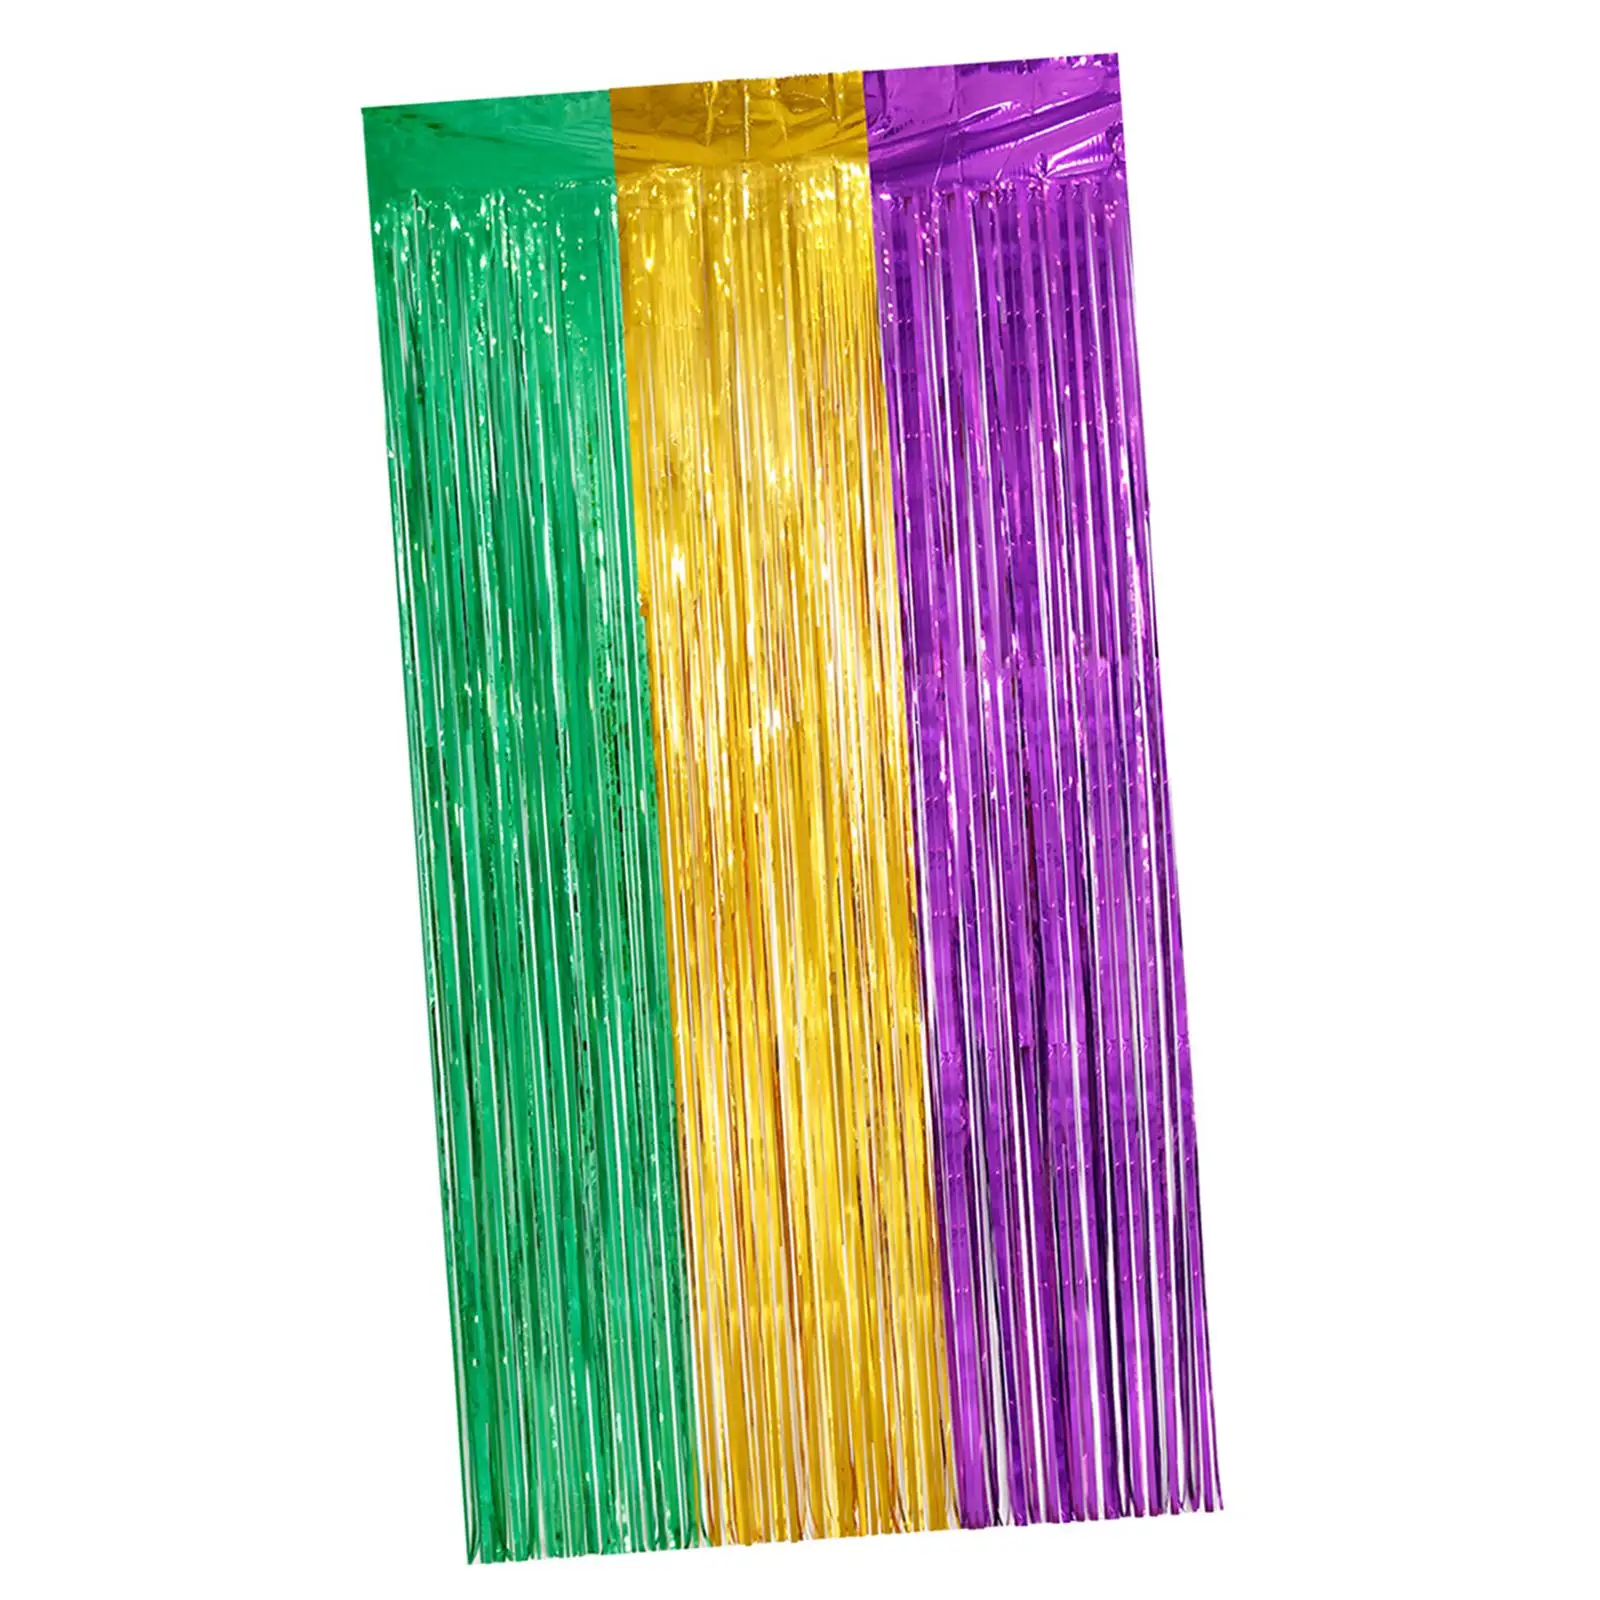 Mardi Gras Metallic Foil Fringe Curtains Photo Backdrop Carnival Foil Streamers Party Supplies for Holiday Door Wall Decoration